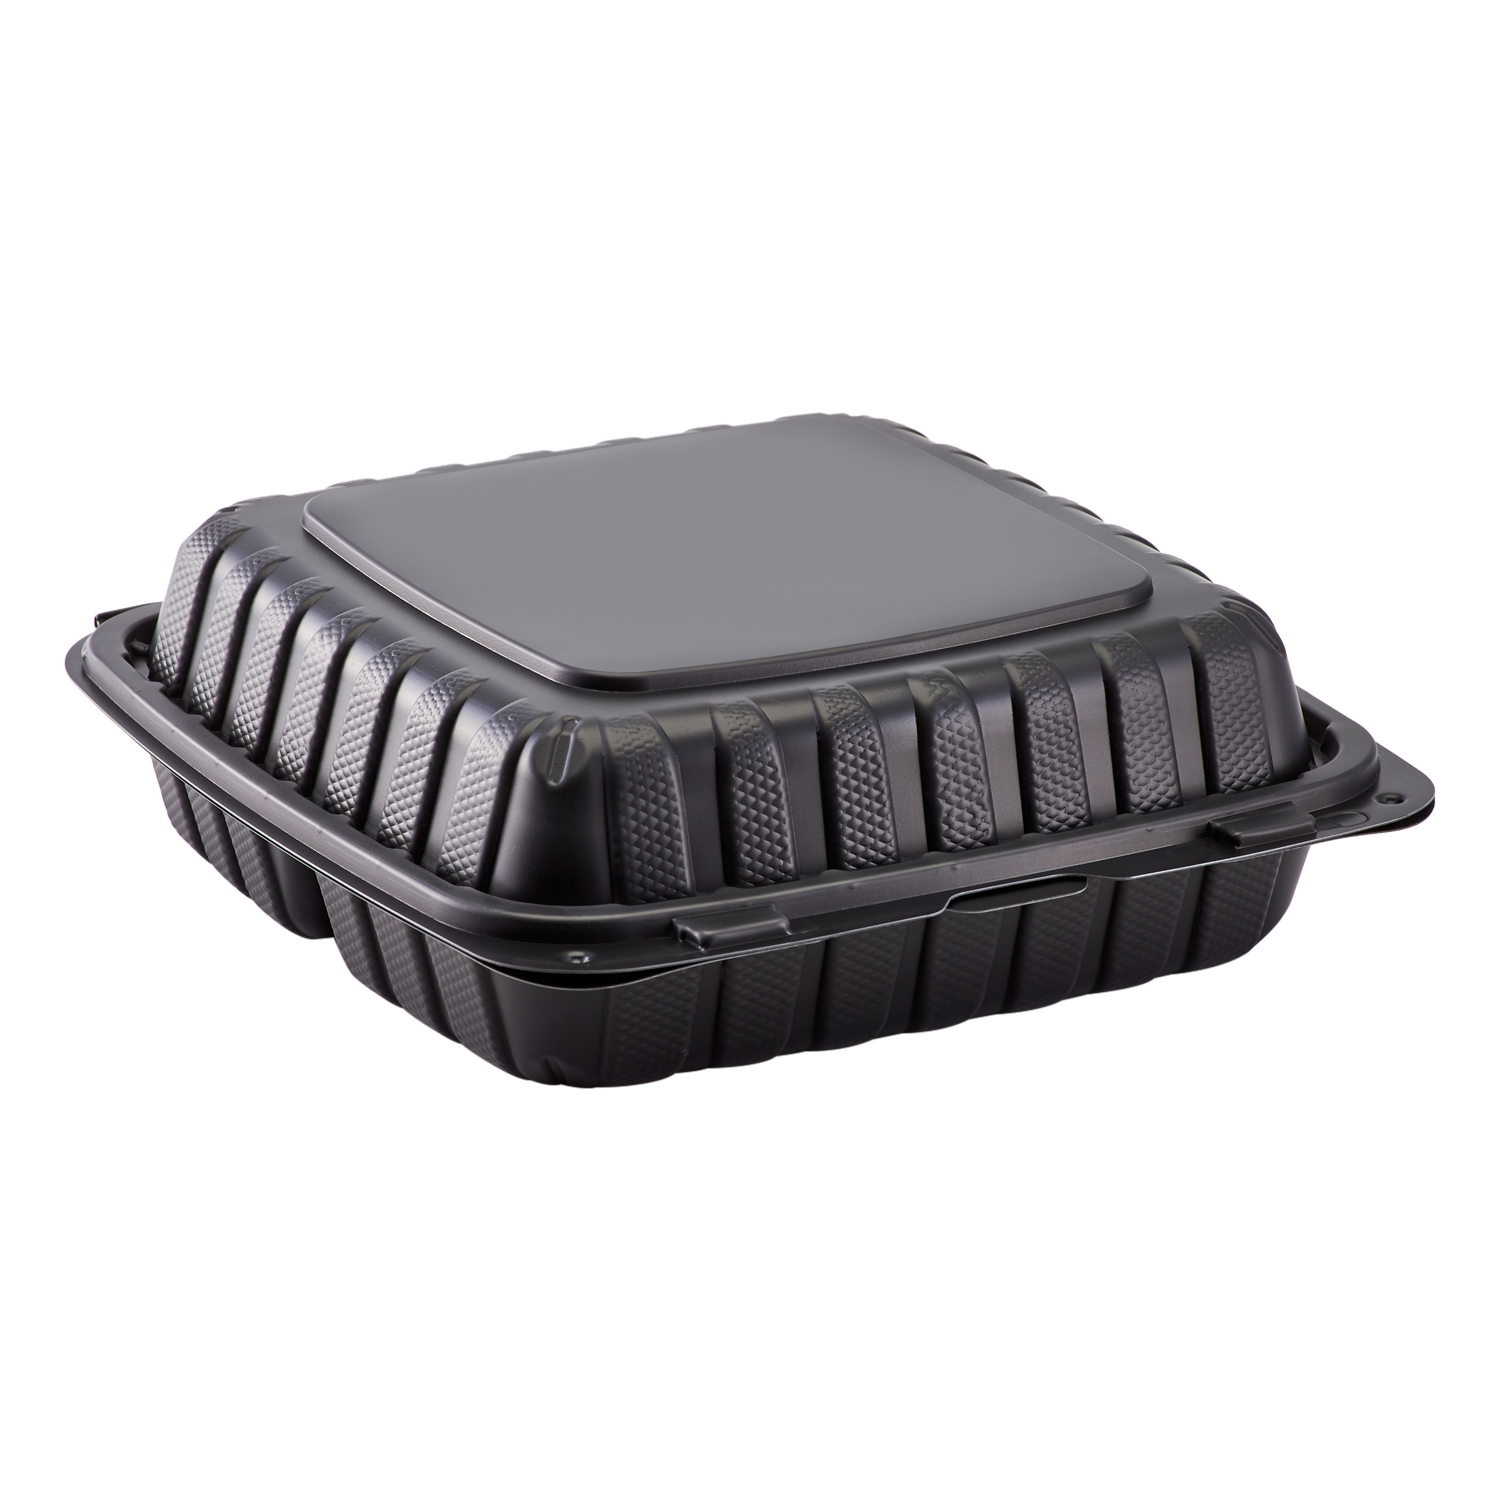 3 Compartment Takeout Containers - Wholesale Jumbo Black Boxes